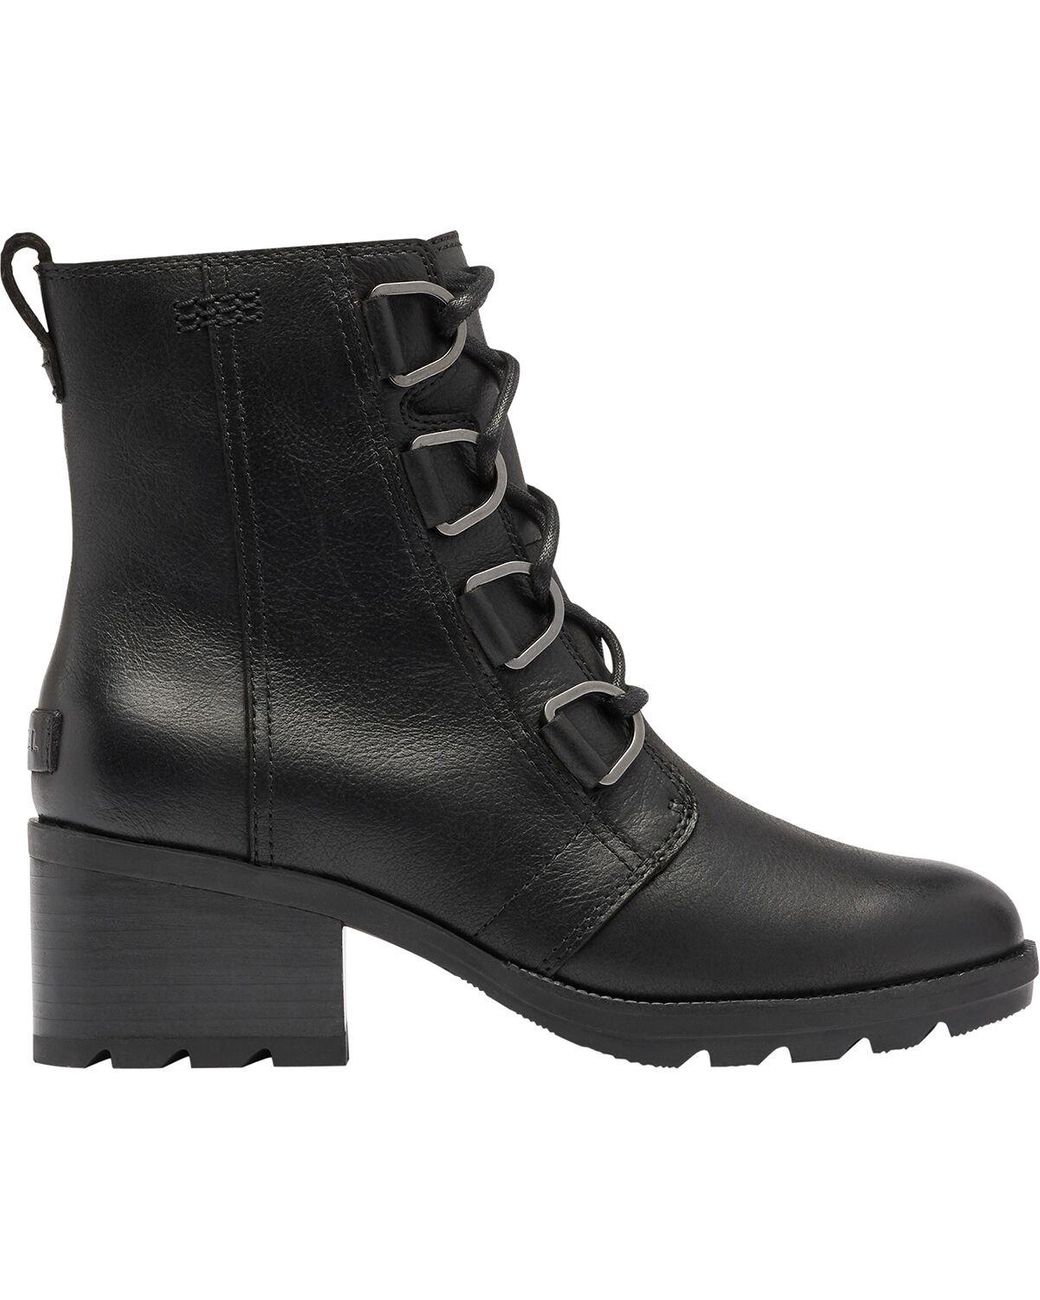 Sorel Cate Lace Boot in Black - Lyst